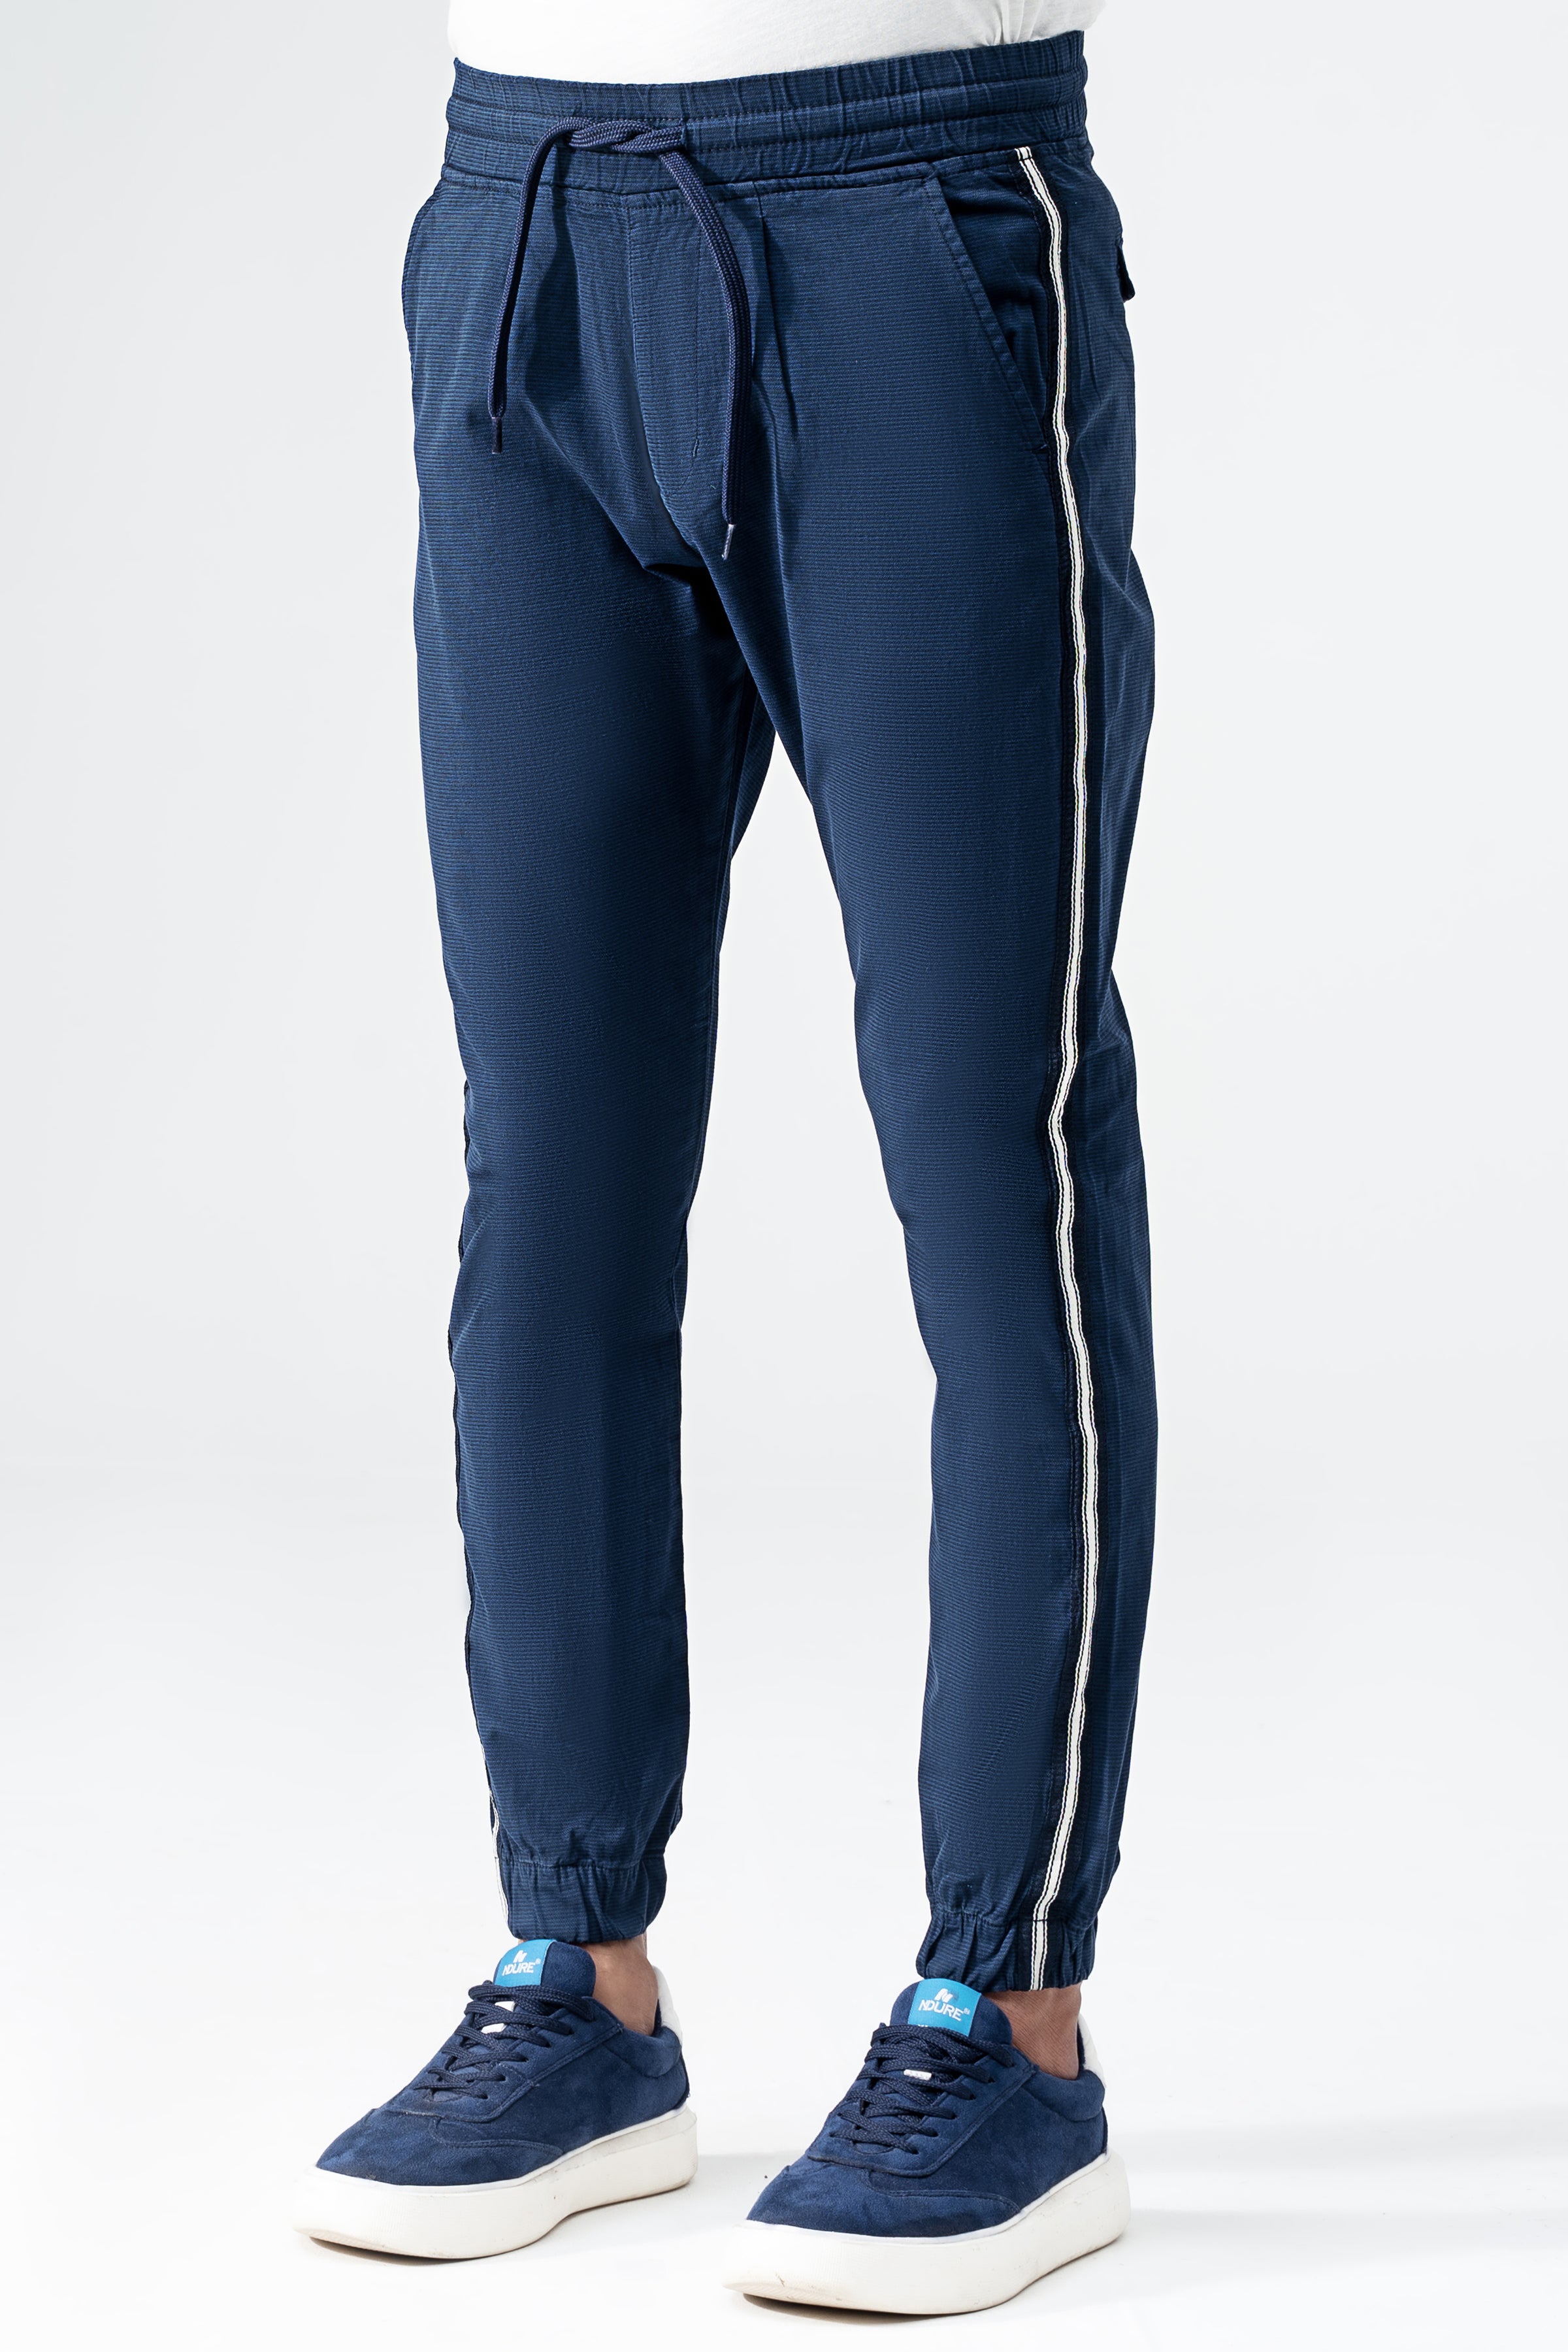 SELF TEXTURED CONTRAST TAPE TROUSER NAVY BLUE